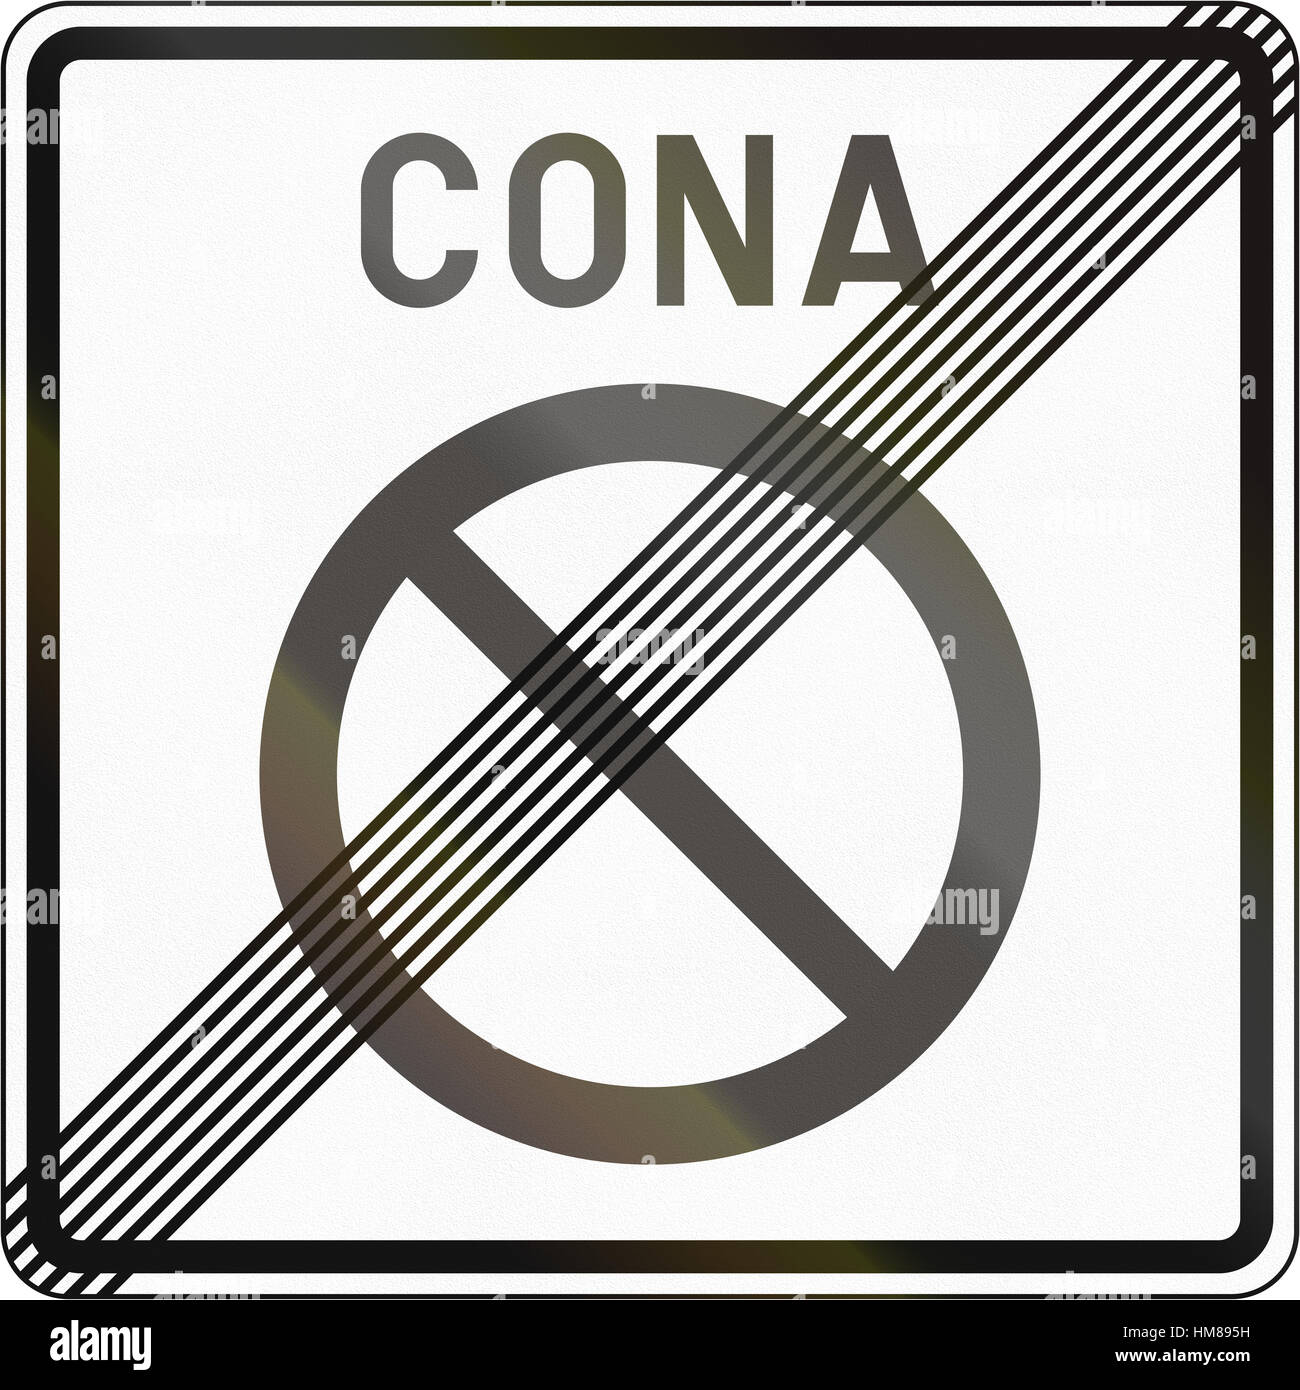 Slovenian road sign - End No parking zone. Cona means zone. Stock Photo